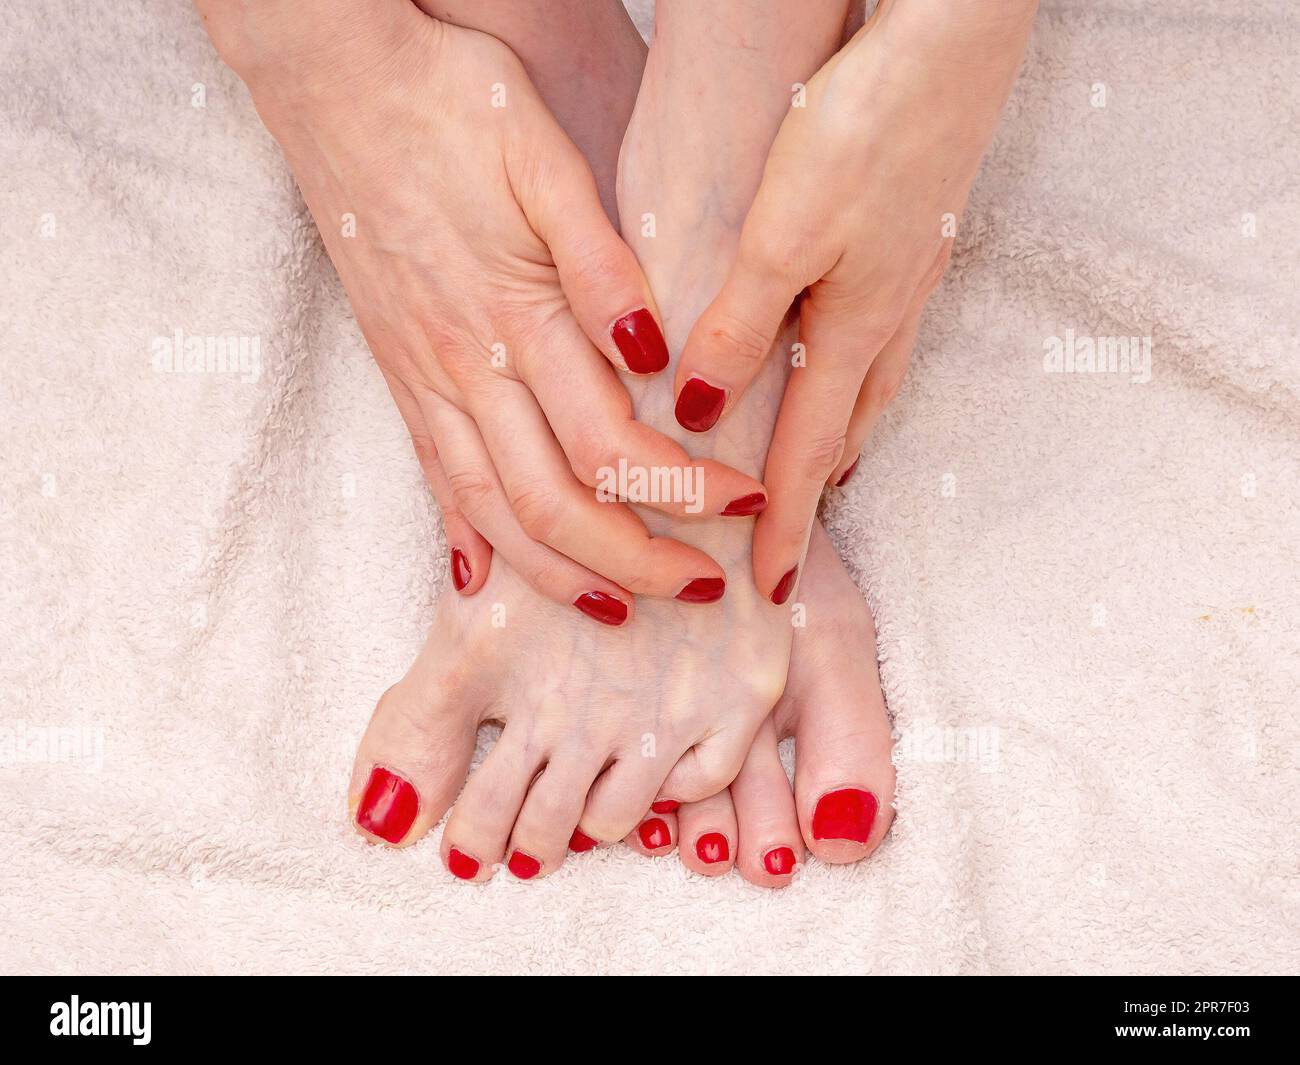 Pedicure and manicure nails Stock Photo